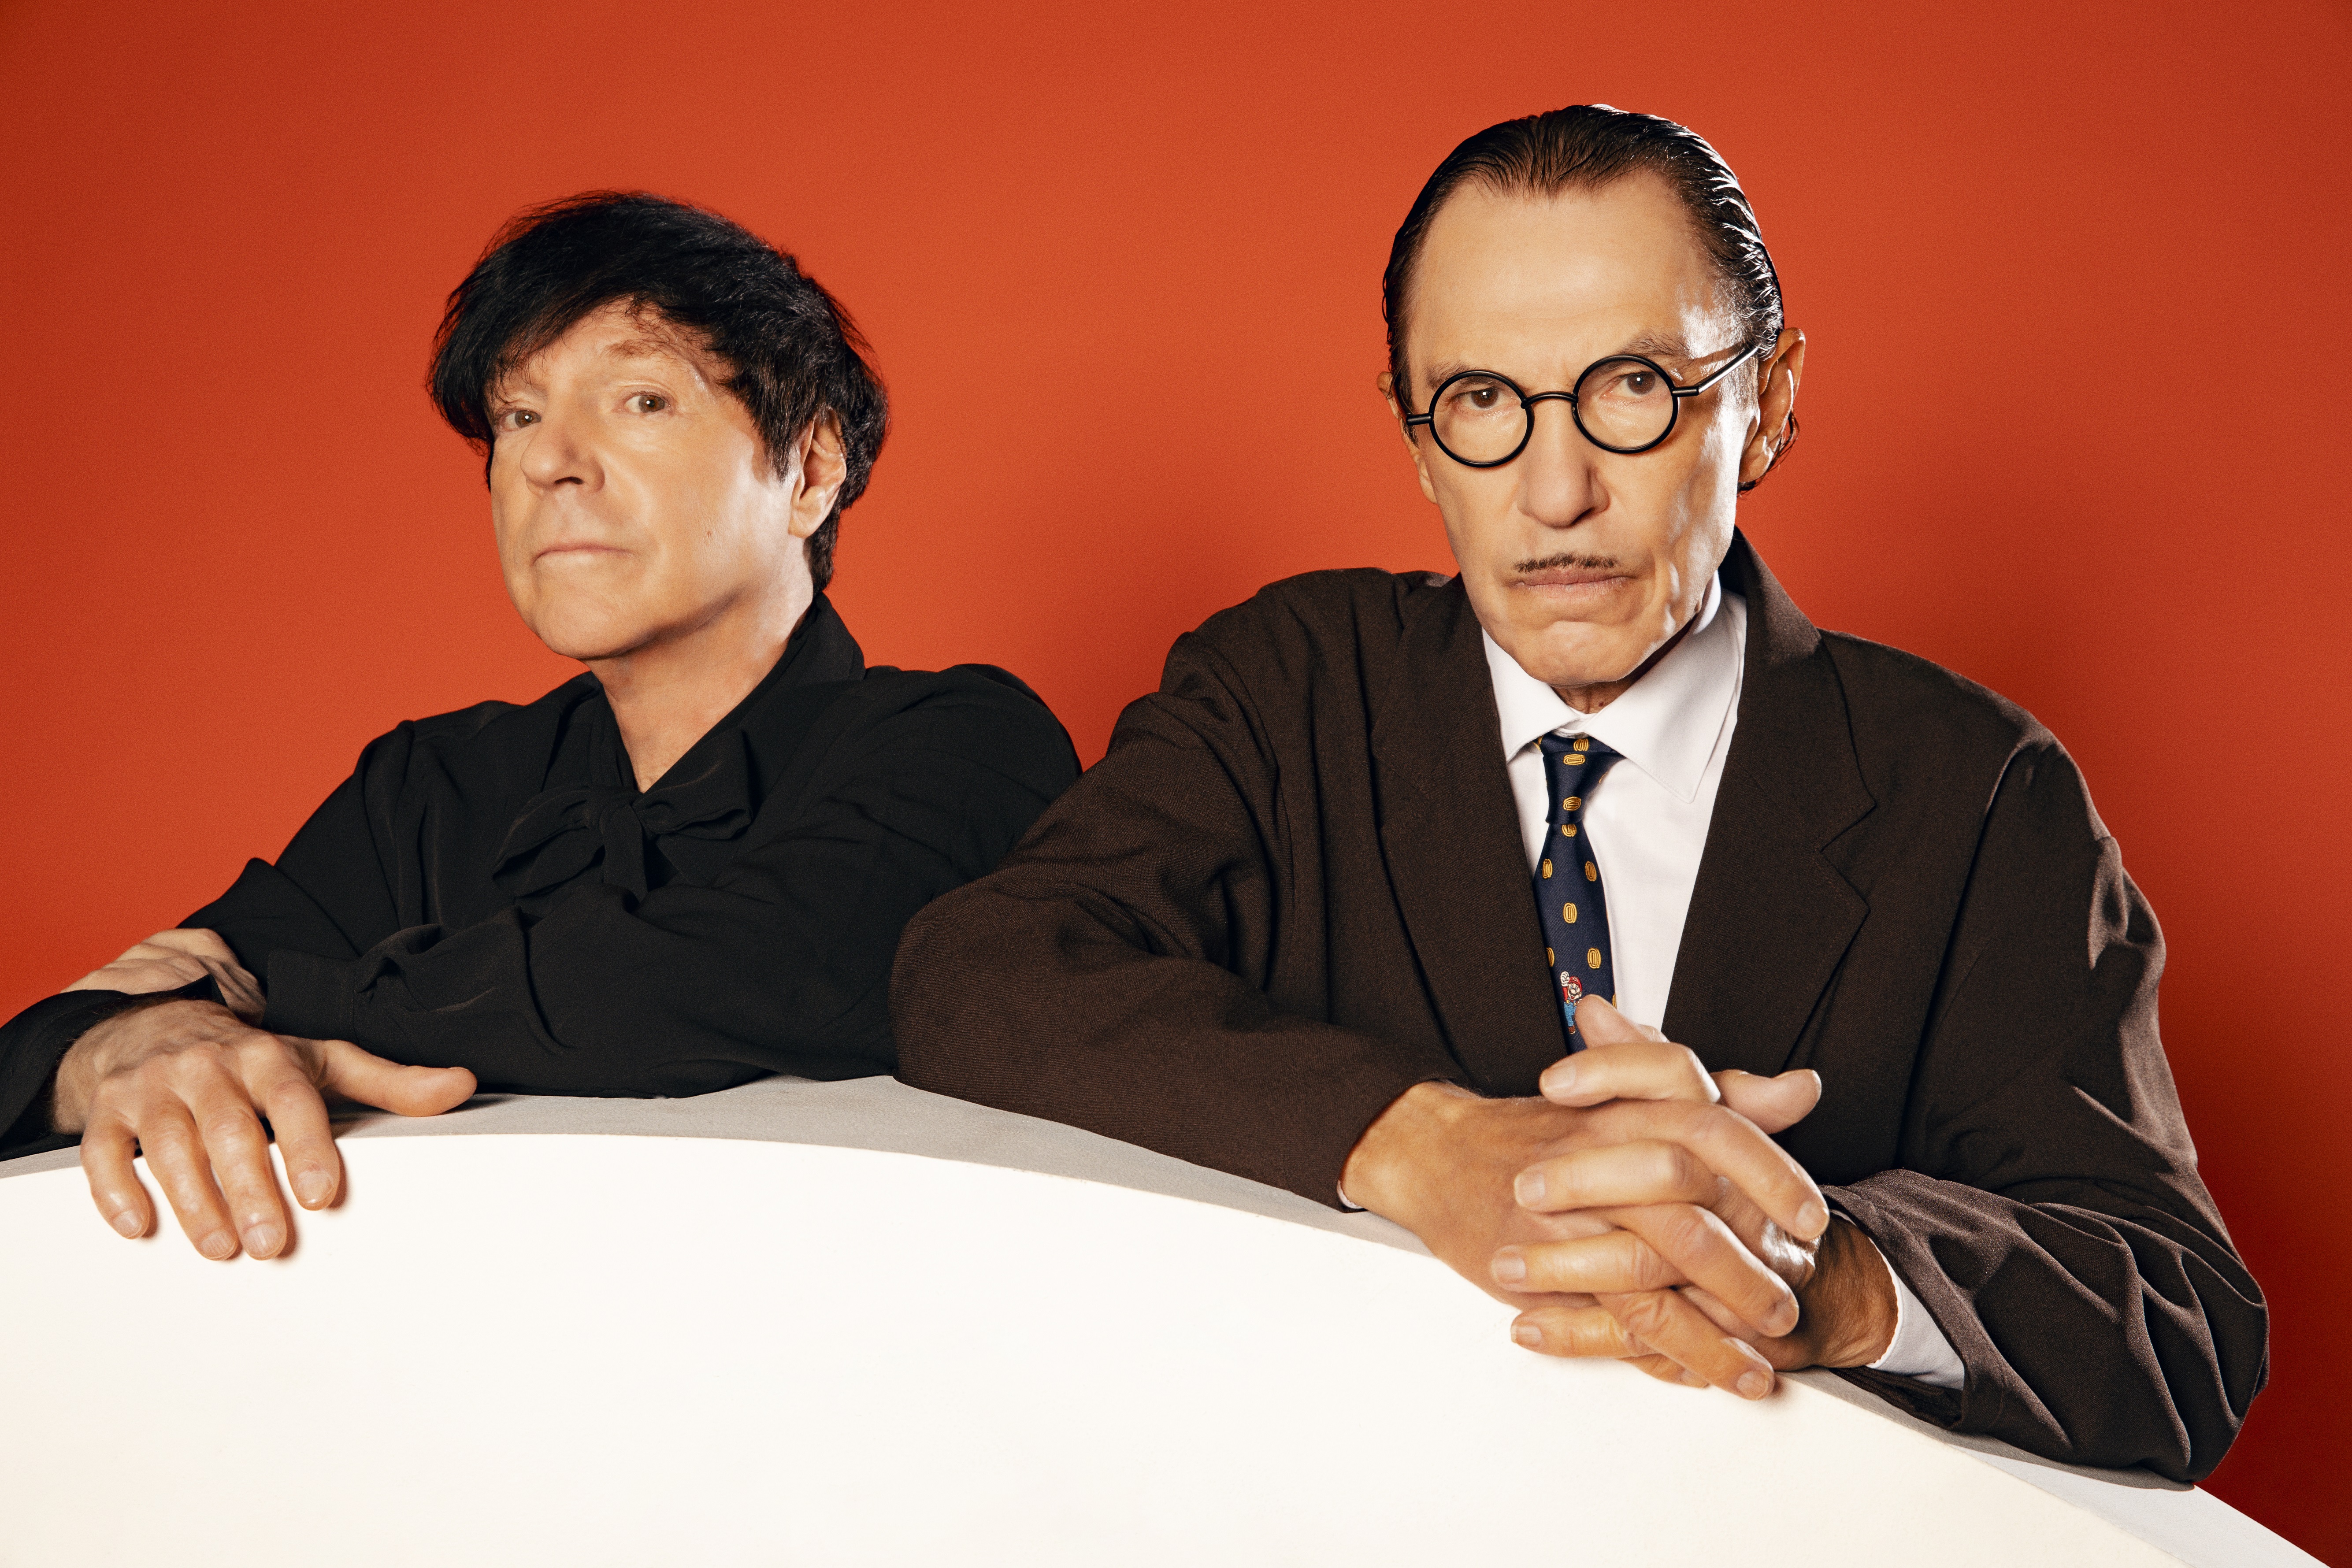 Russell Mael (left) and Ron Mael (right)
